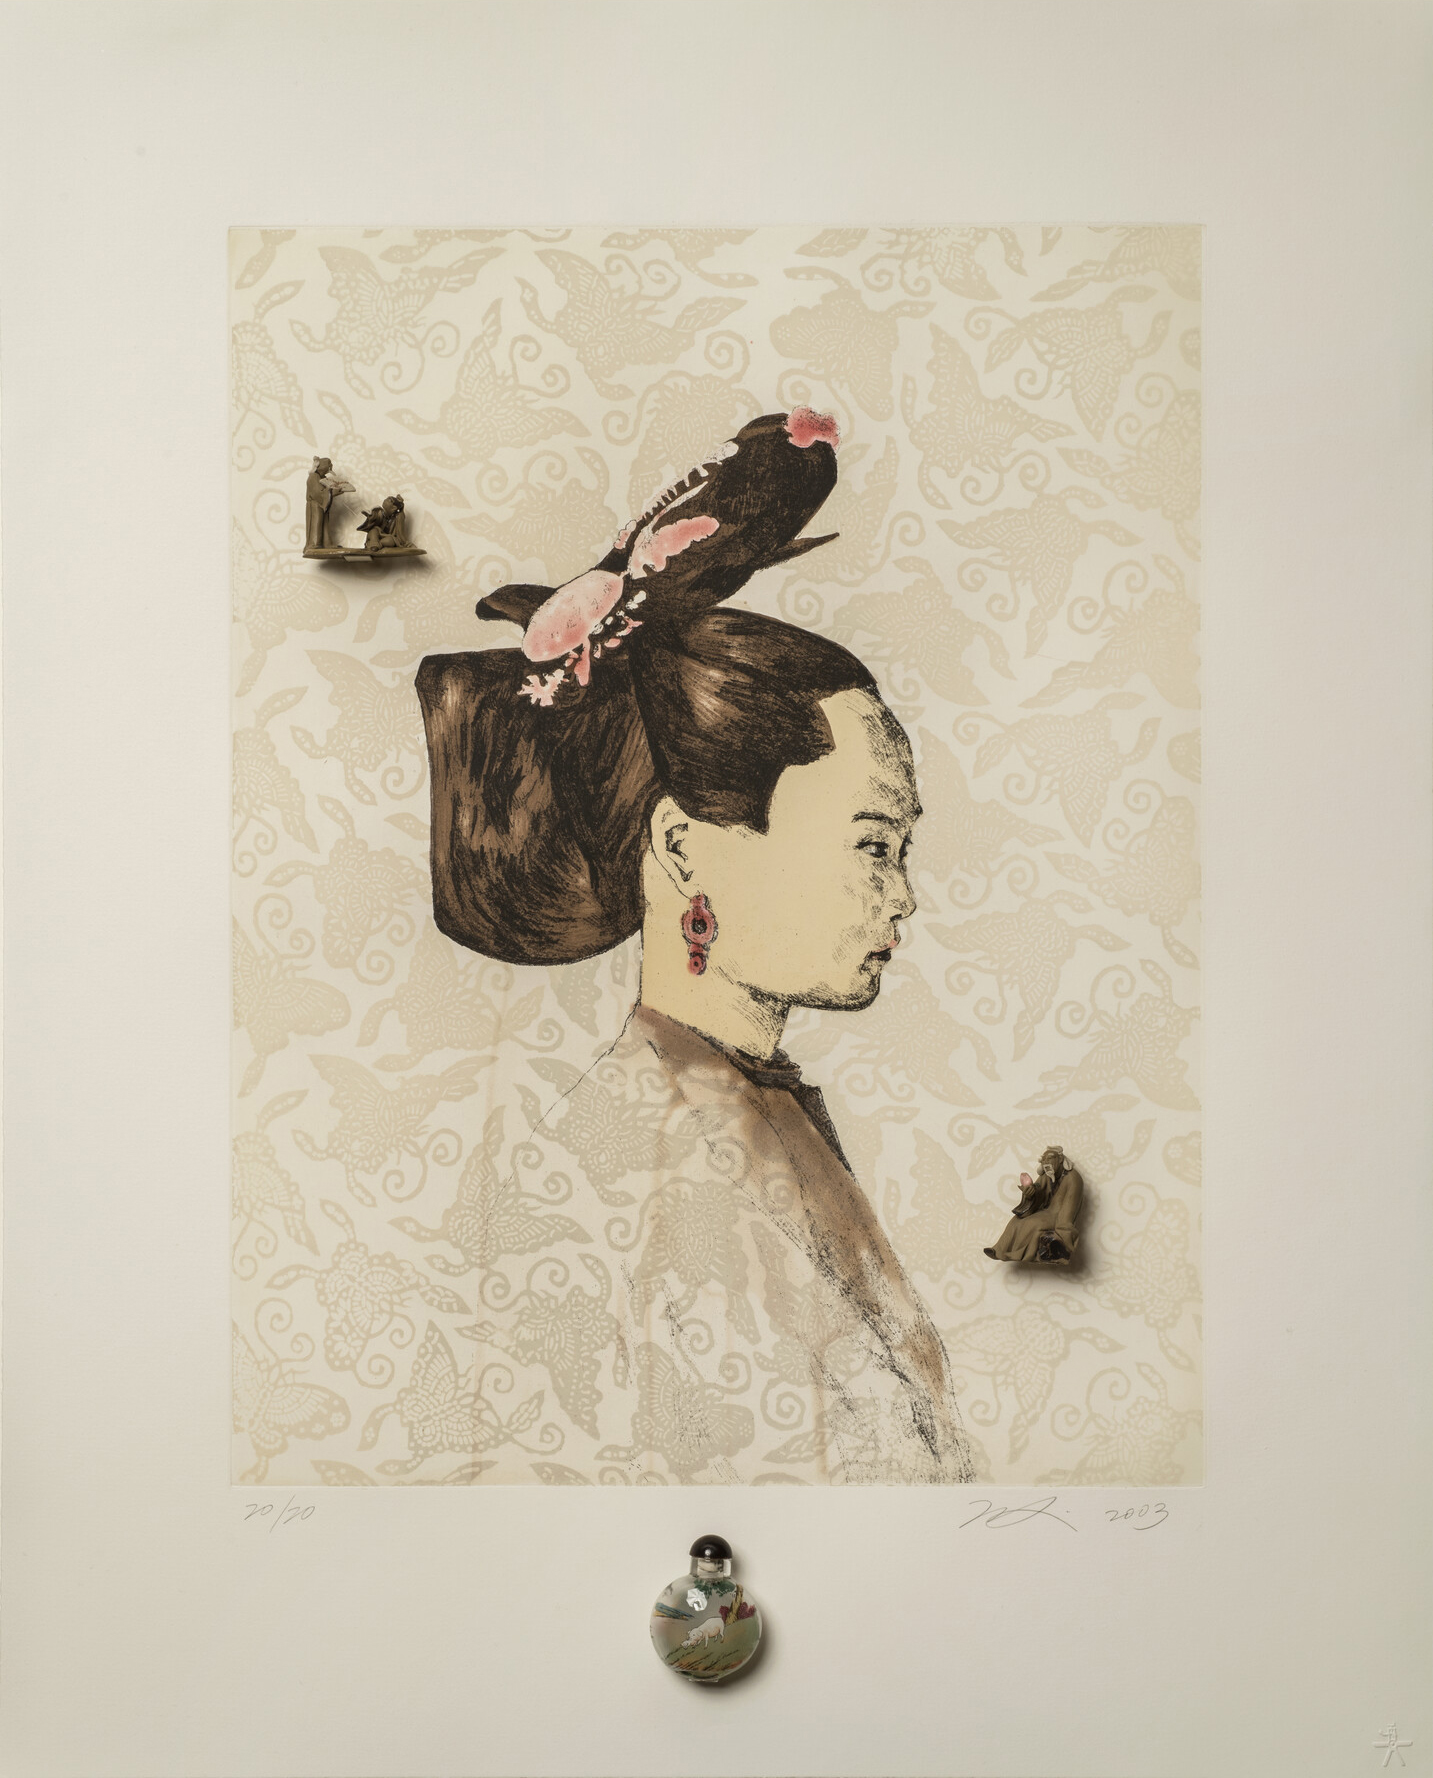 A portrait bust print of an East Asian woman seen in profile with a butterfly-patterned background. She wears an elaborate up-do with coral colored hair accessories and earrings. Two small figural sculptures and a small glass vase are attached to the surface of the paper.